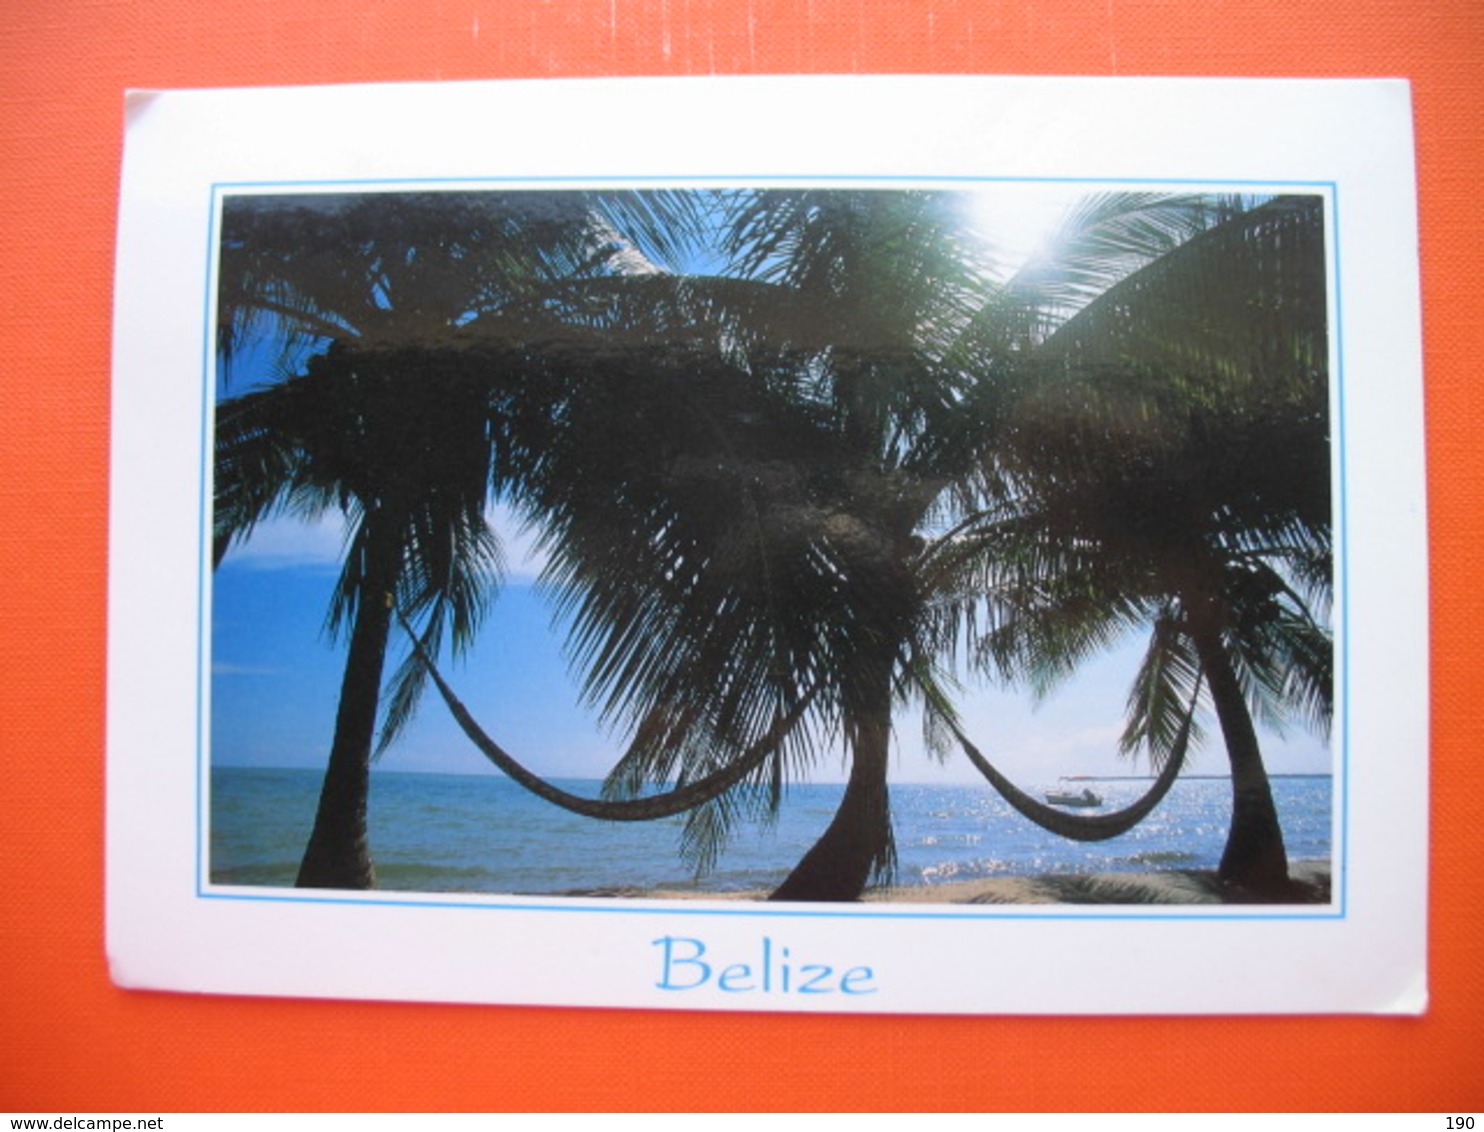 Life In The Tropics,Placencia - Belize